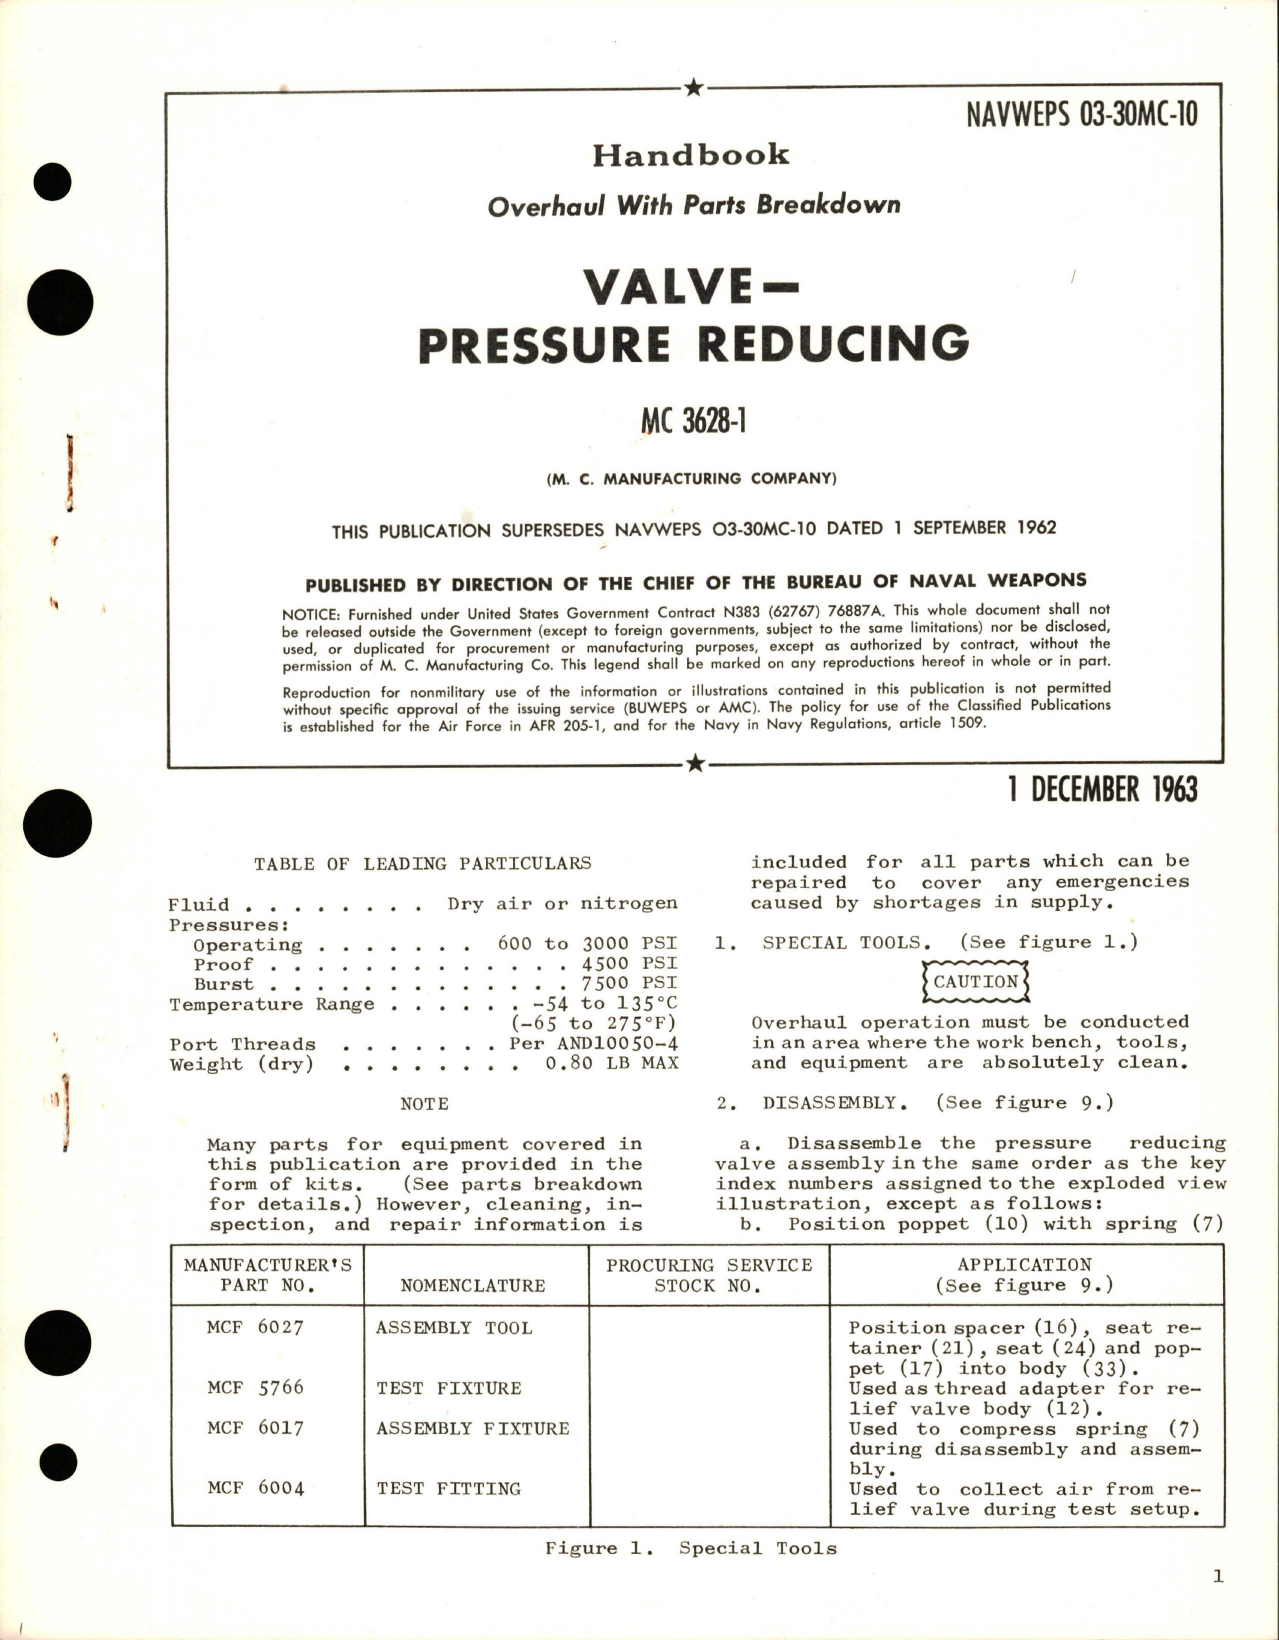 Sample page 1 from AirCorps Library document: Overhaul with Parts Breakdown for Pressure Reducing Valve - MC 3628-1